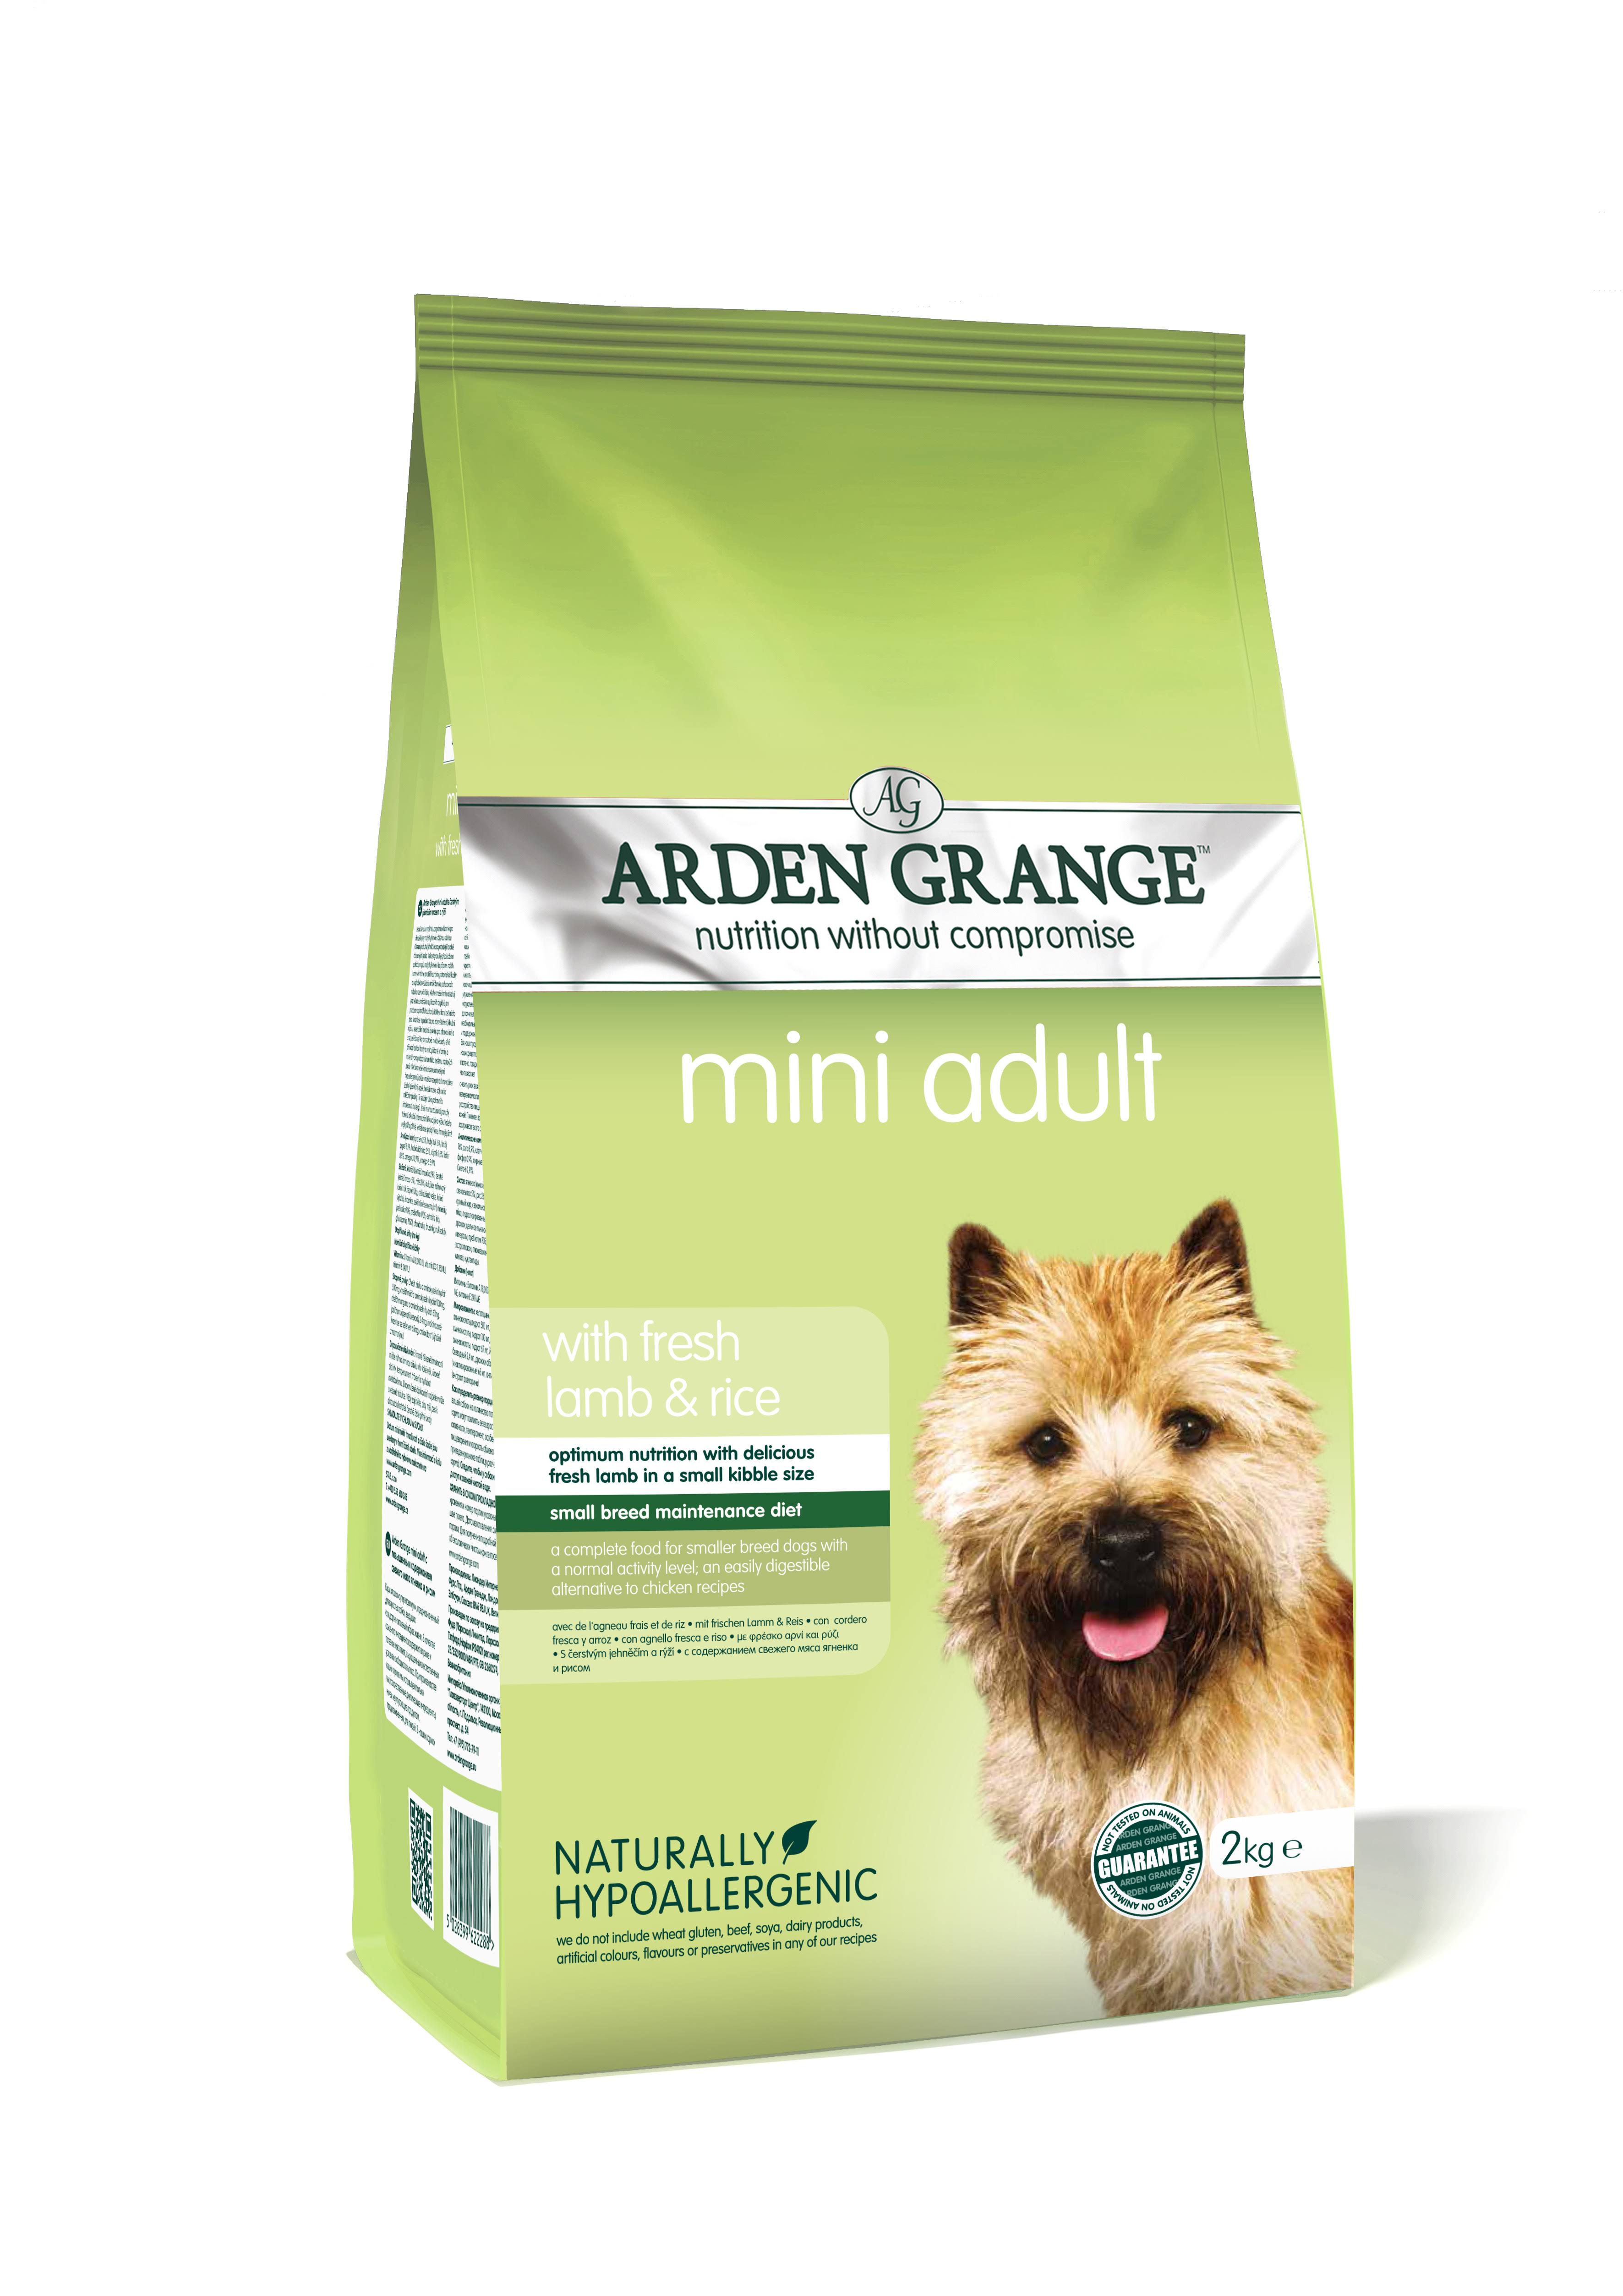 Arden Grange Mini Adult Dog Food - with Fresh Lamb and Rice, 2kg